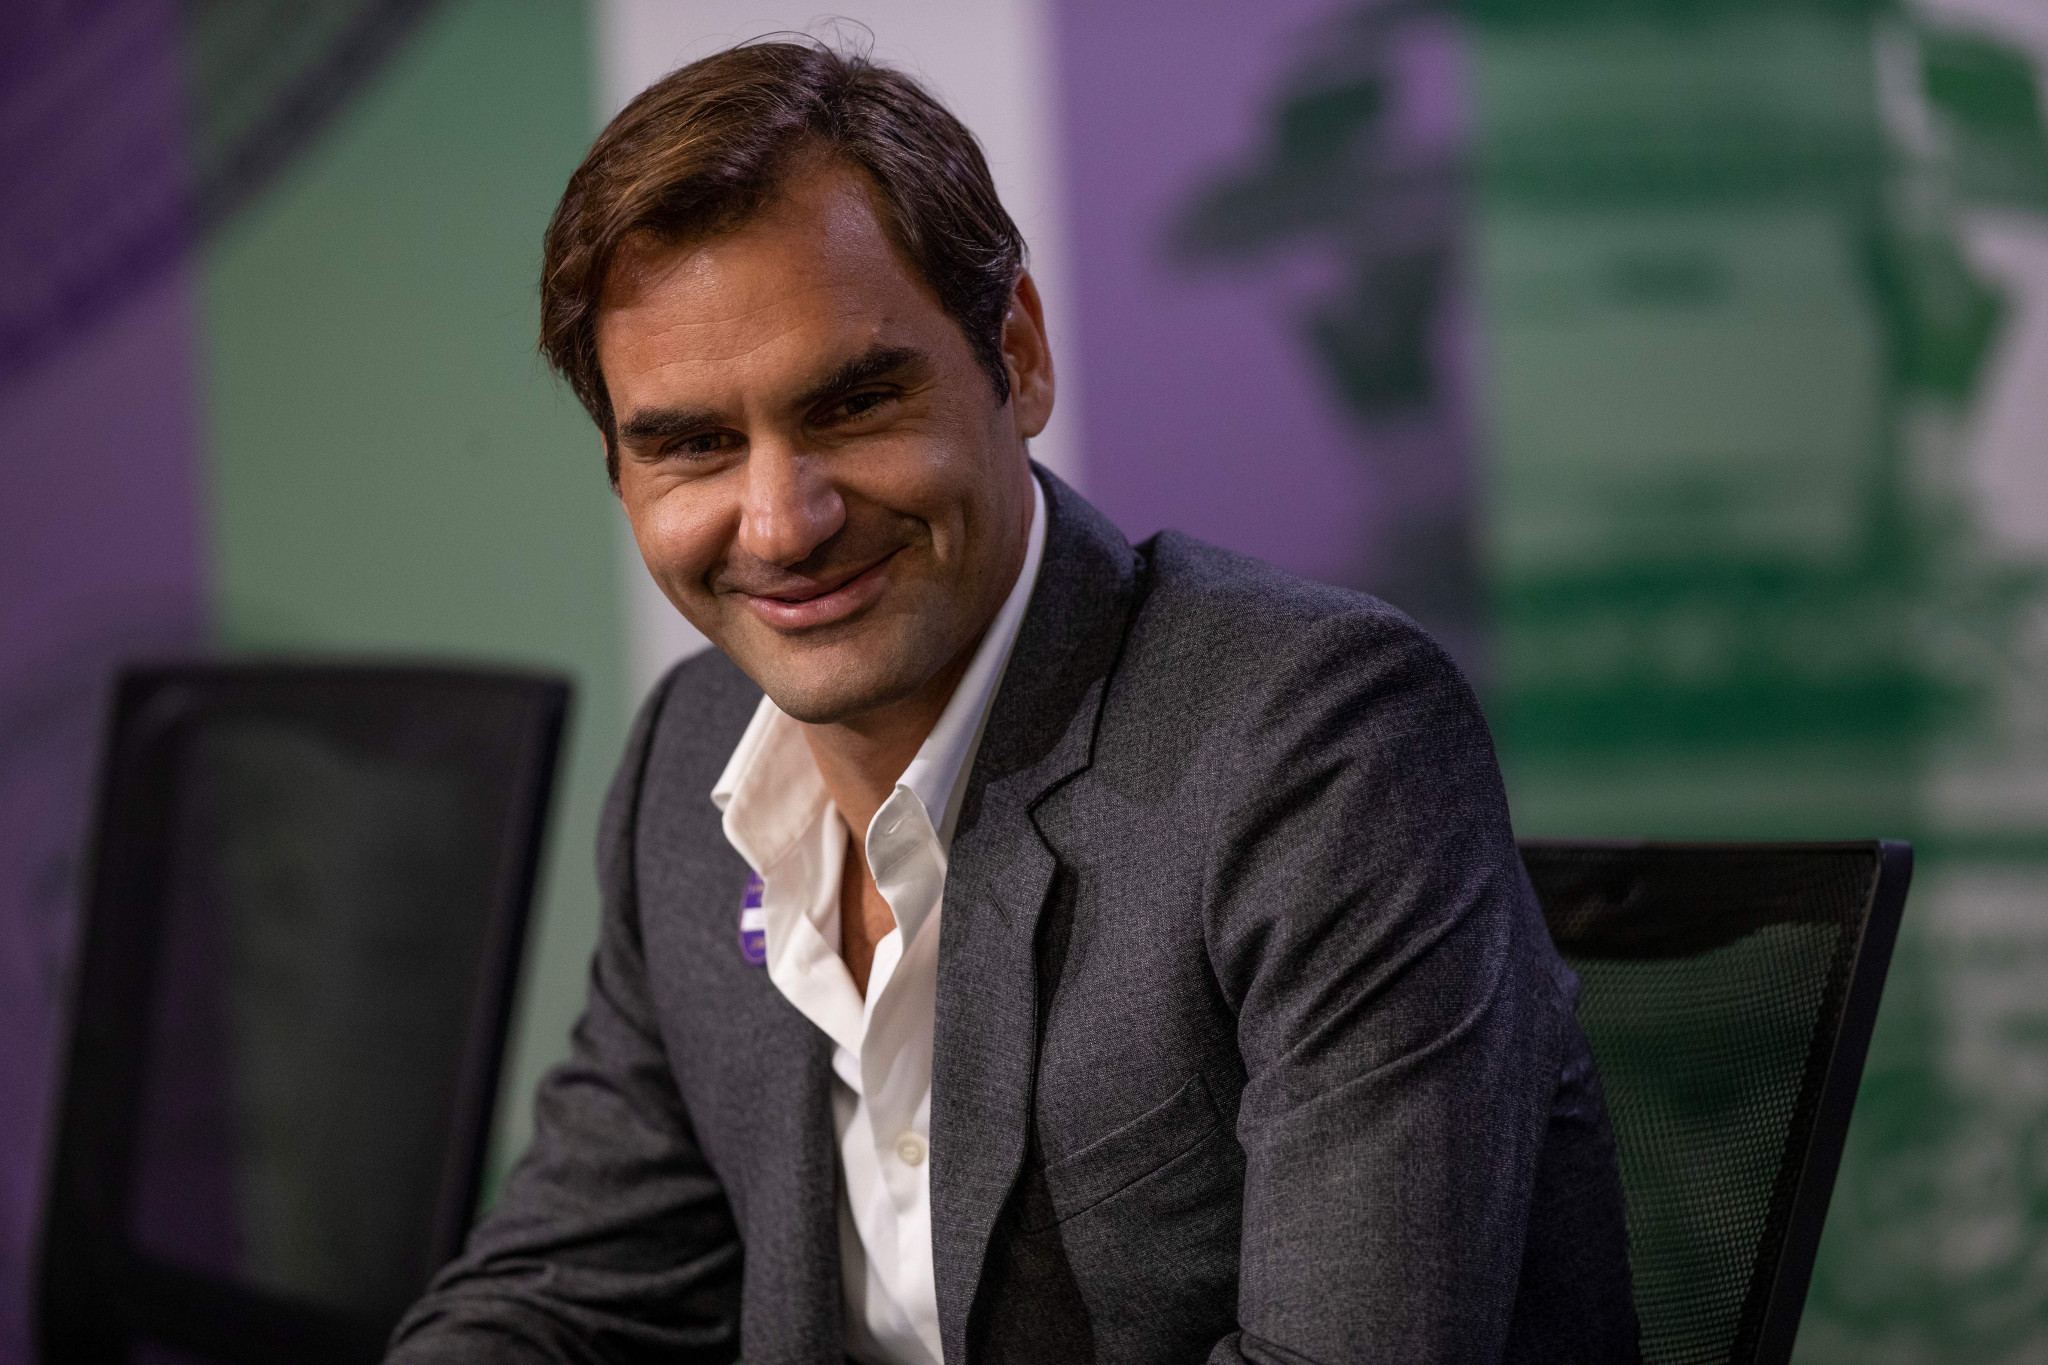 Federer says there will never be enough drug testing in tennis